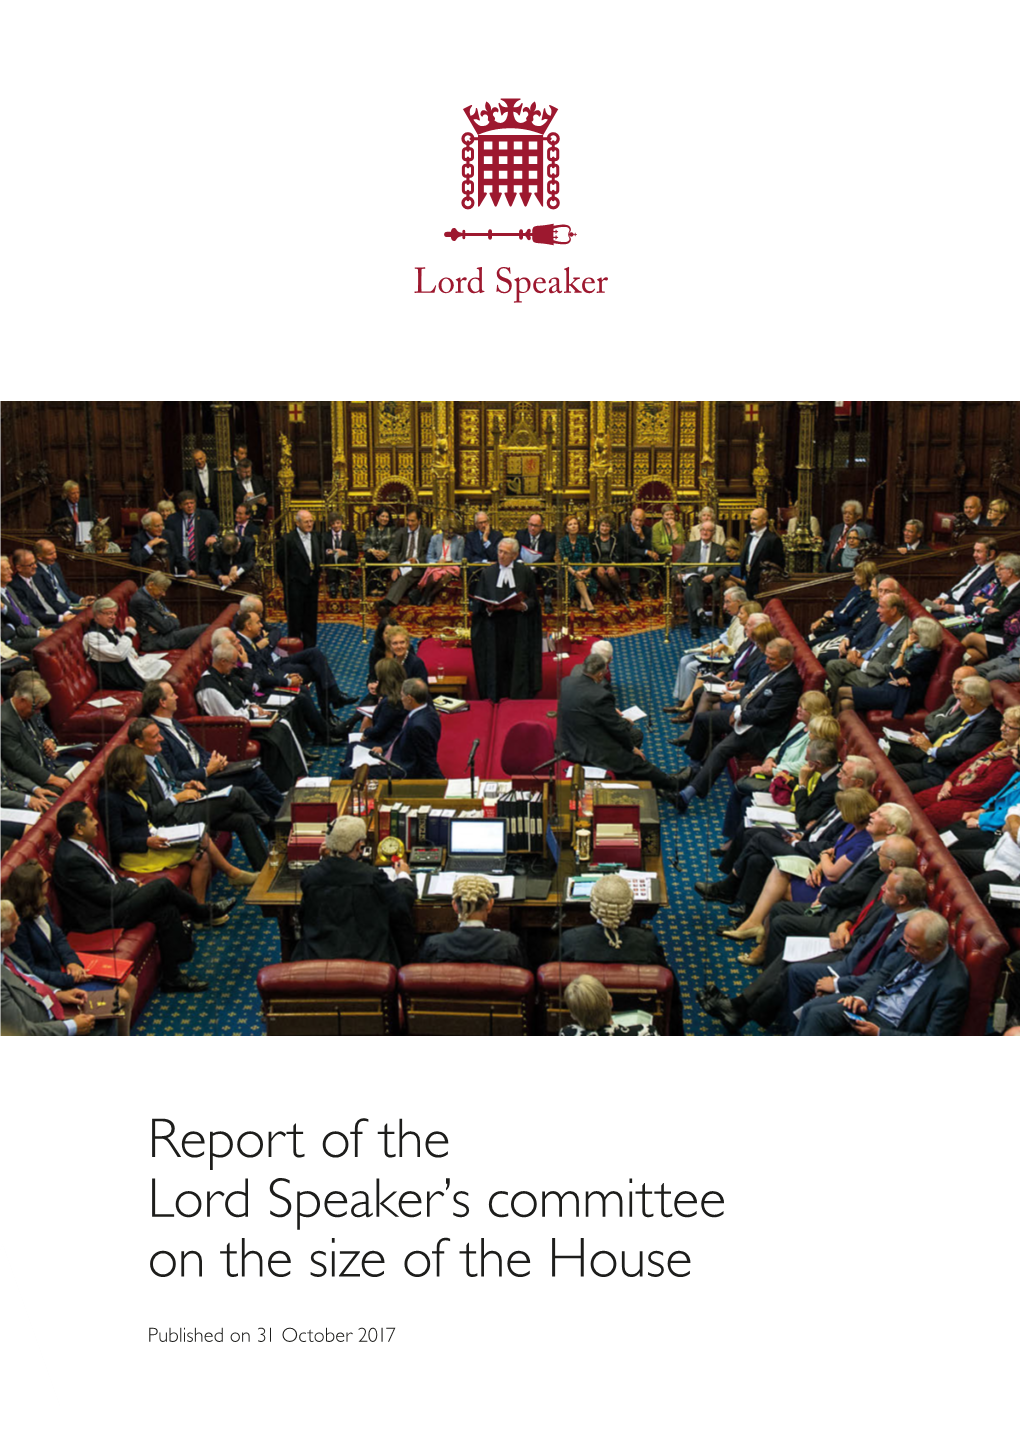 Report of the Lord Speaker's Committee on the Size of the House